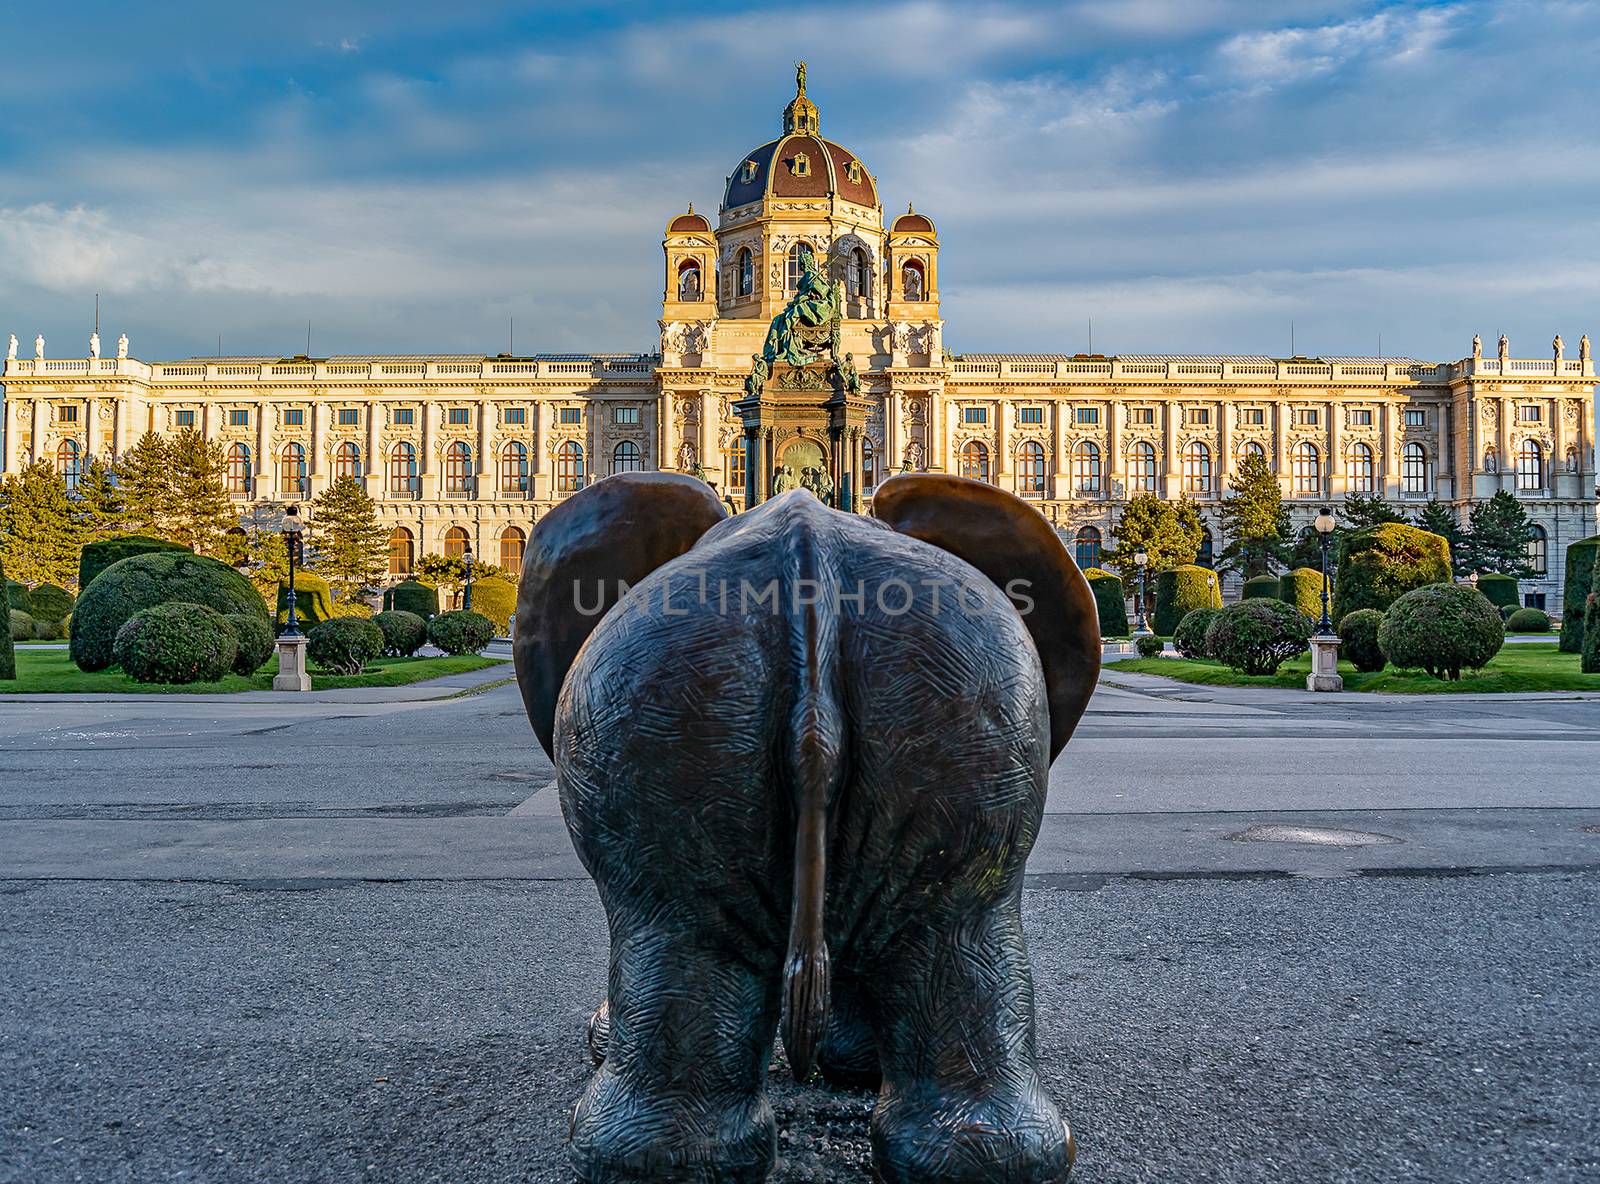 Bronze elephant and the Kunsthistorisches Museum in Vienna by Umtsga